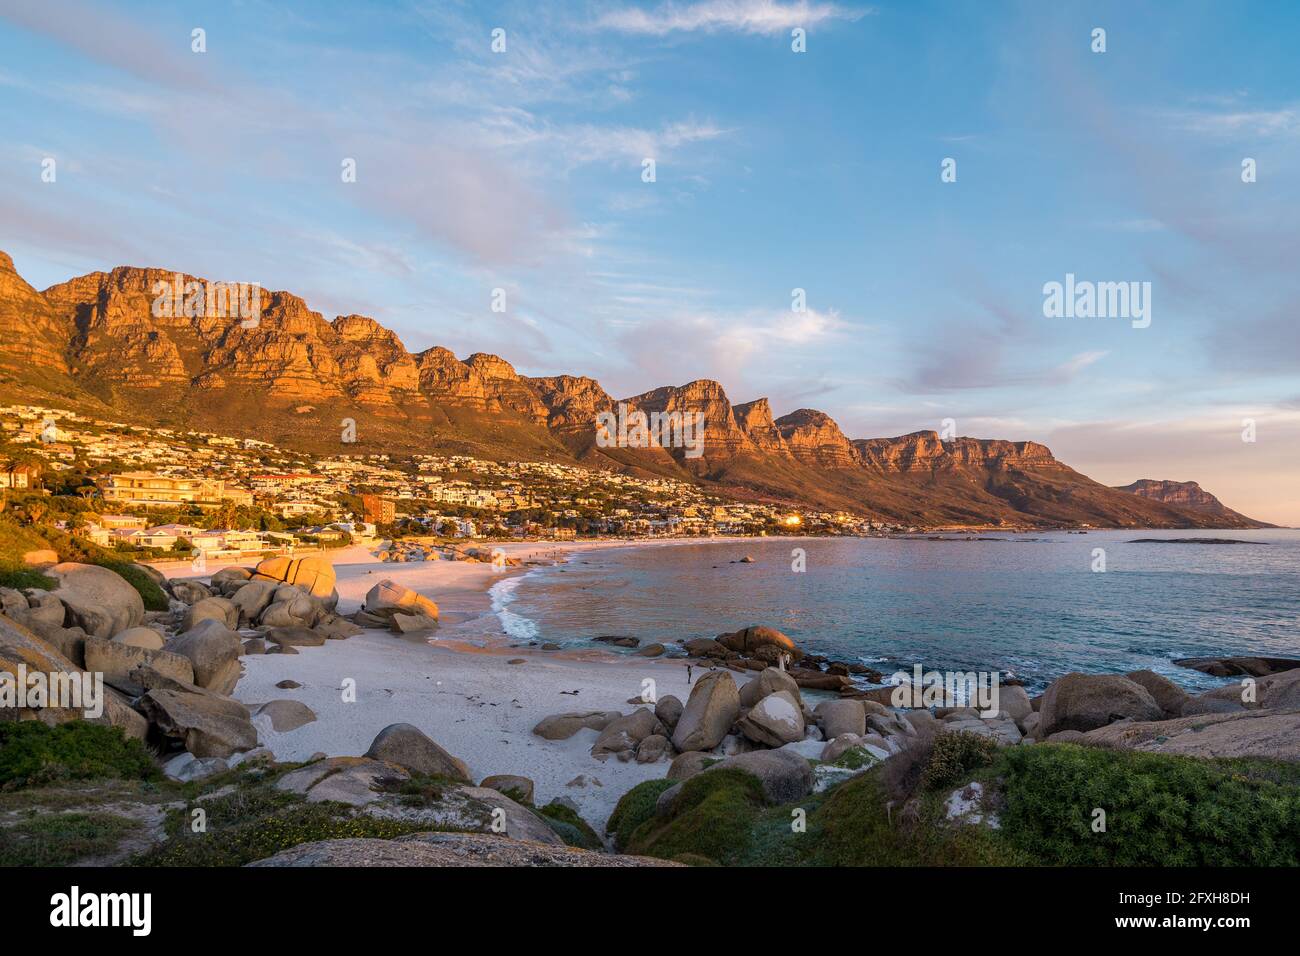 Sunset over Camps Bay Beach in Cape Town, Western Cape, South Africa. Stock Photo